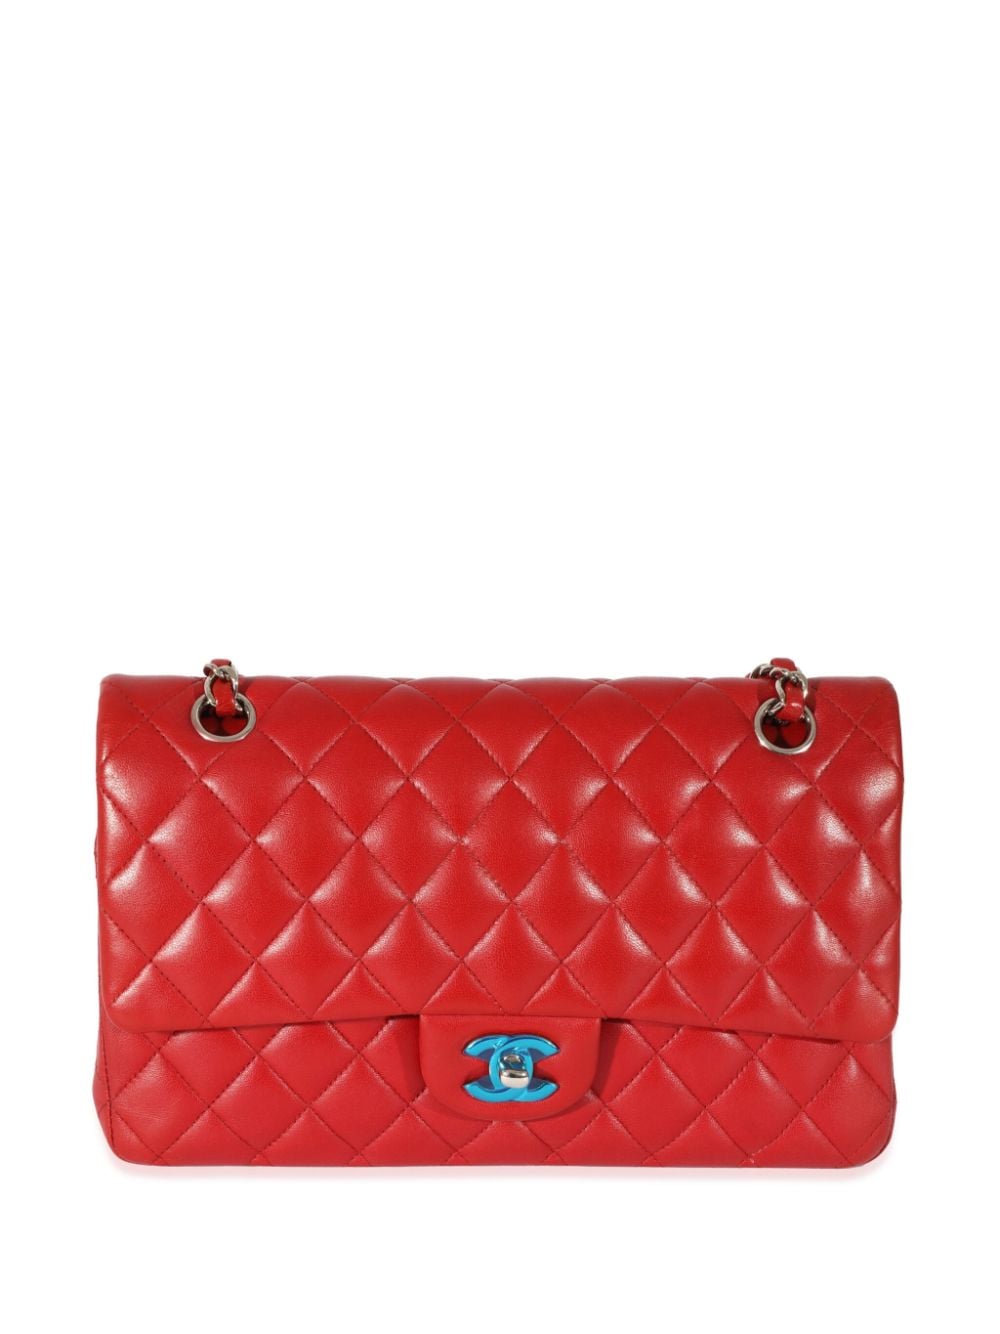 Pre-owned Chanel 2012-2013 Medium Double Flap Shoulder Bag In Red